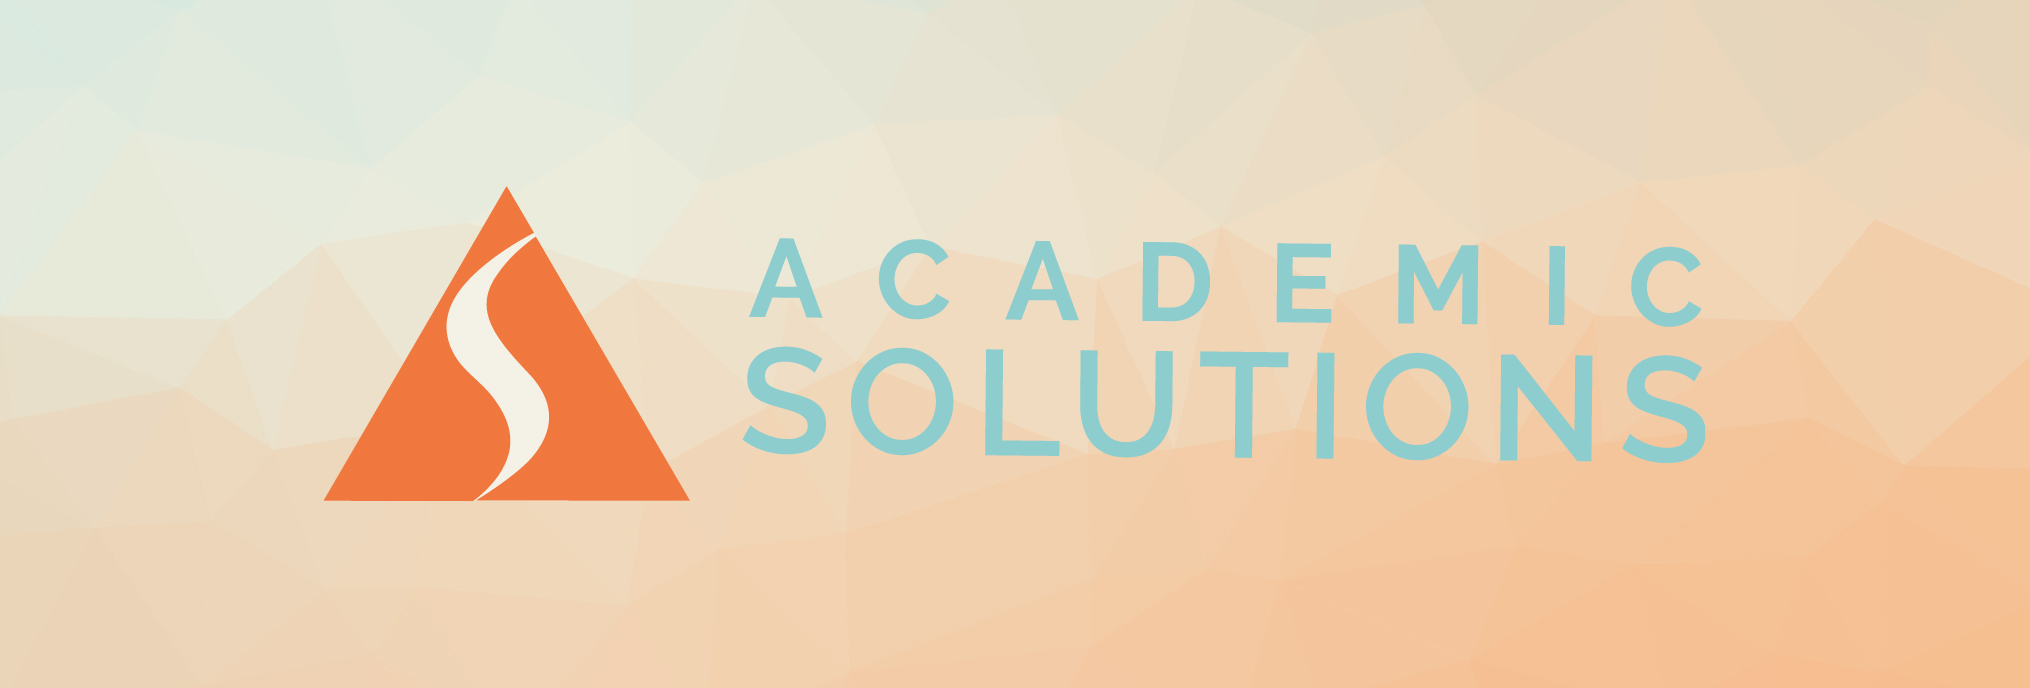 Academic Solutions Sweden AB